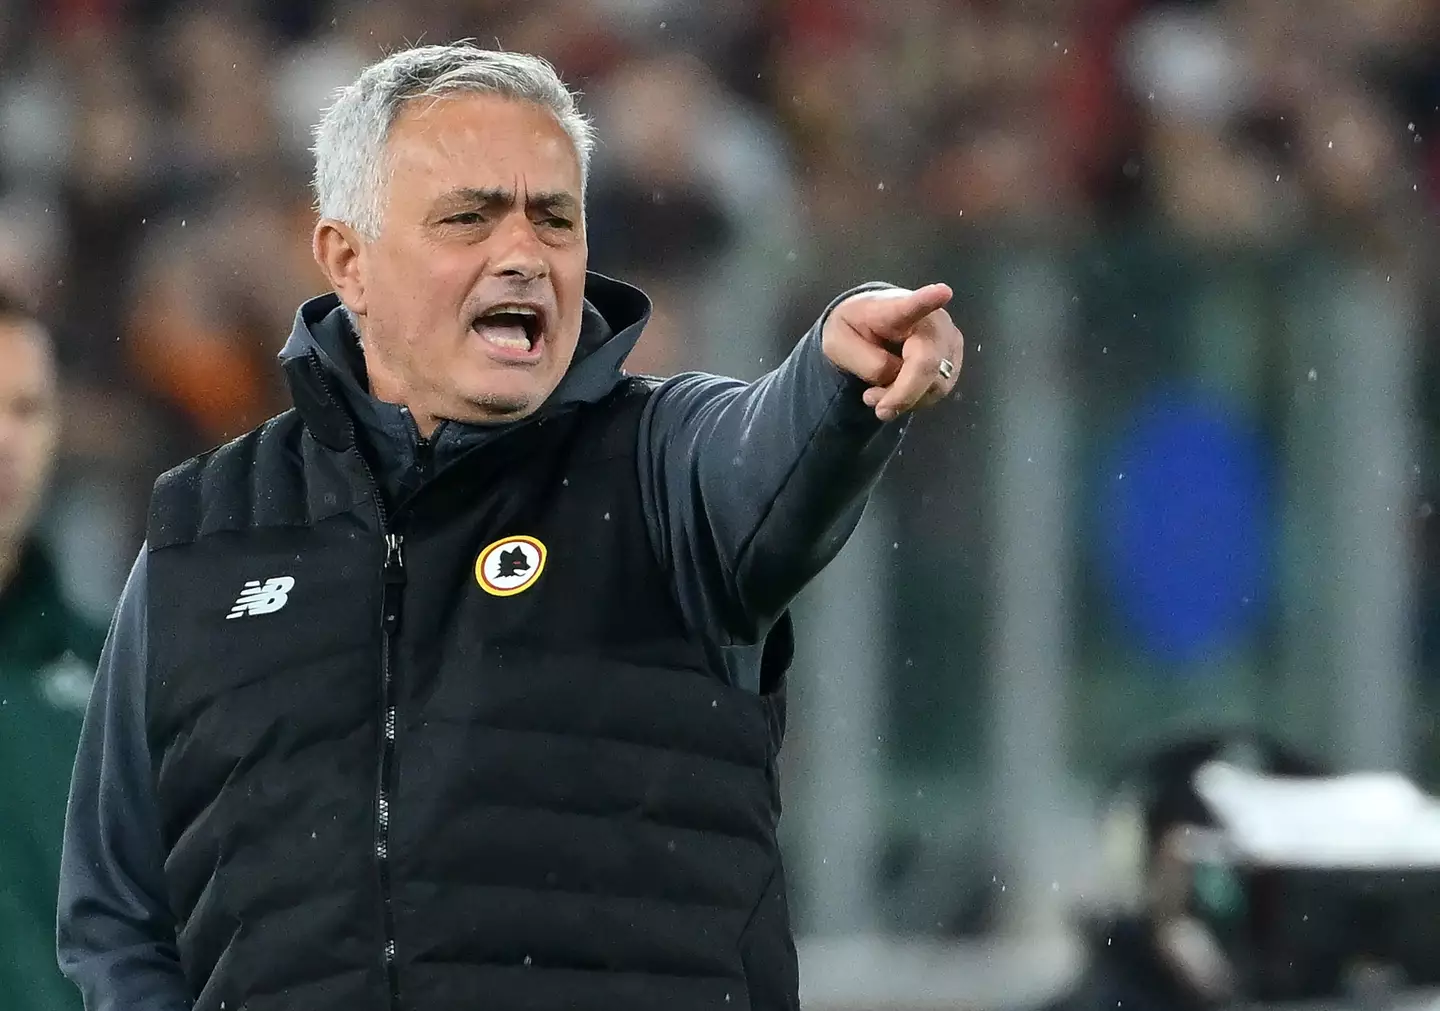 Mourinho was clearly emotional at full-time.